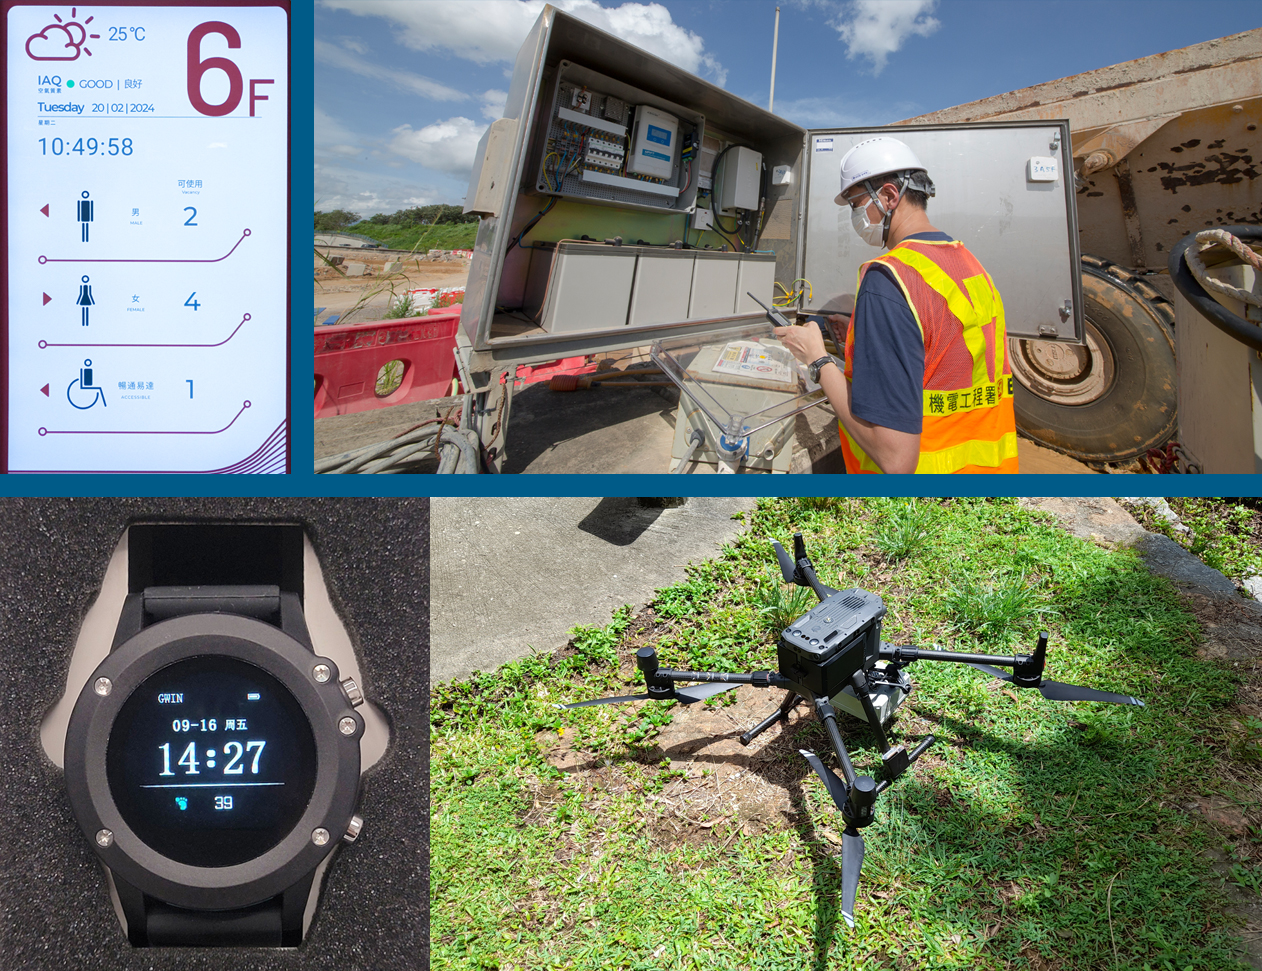 The GWIN supports a variety of IoT applications, including smart toilets (top left), the Smart Site Safety System (top right) and location tracking of hikers in remote areas (bottom).